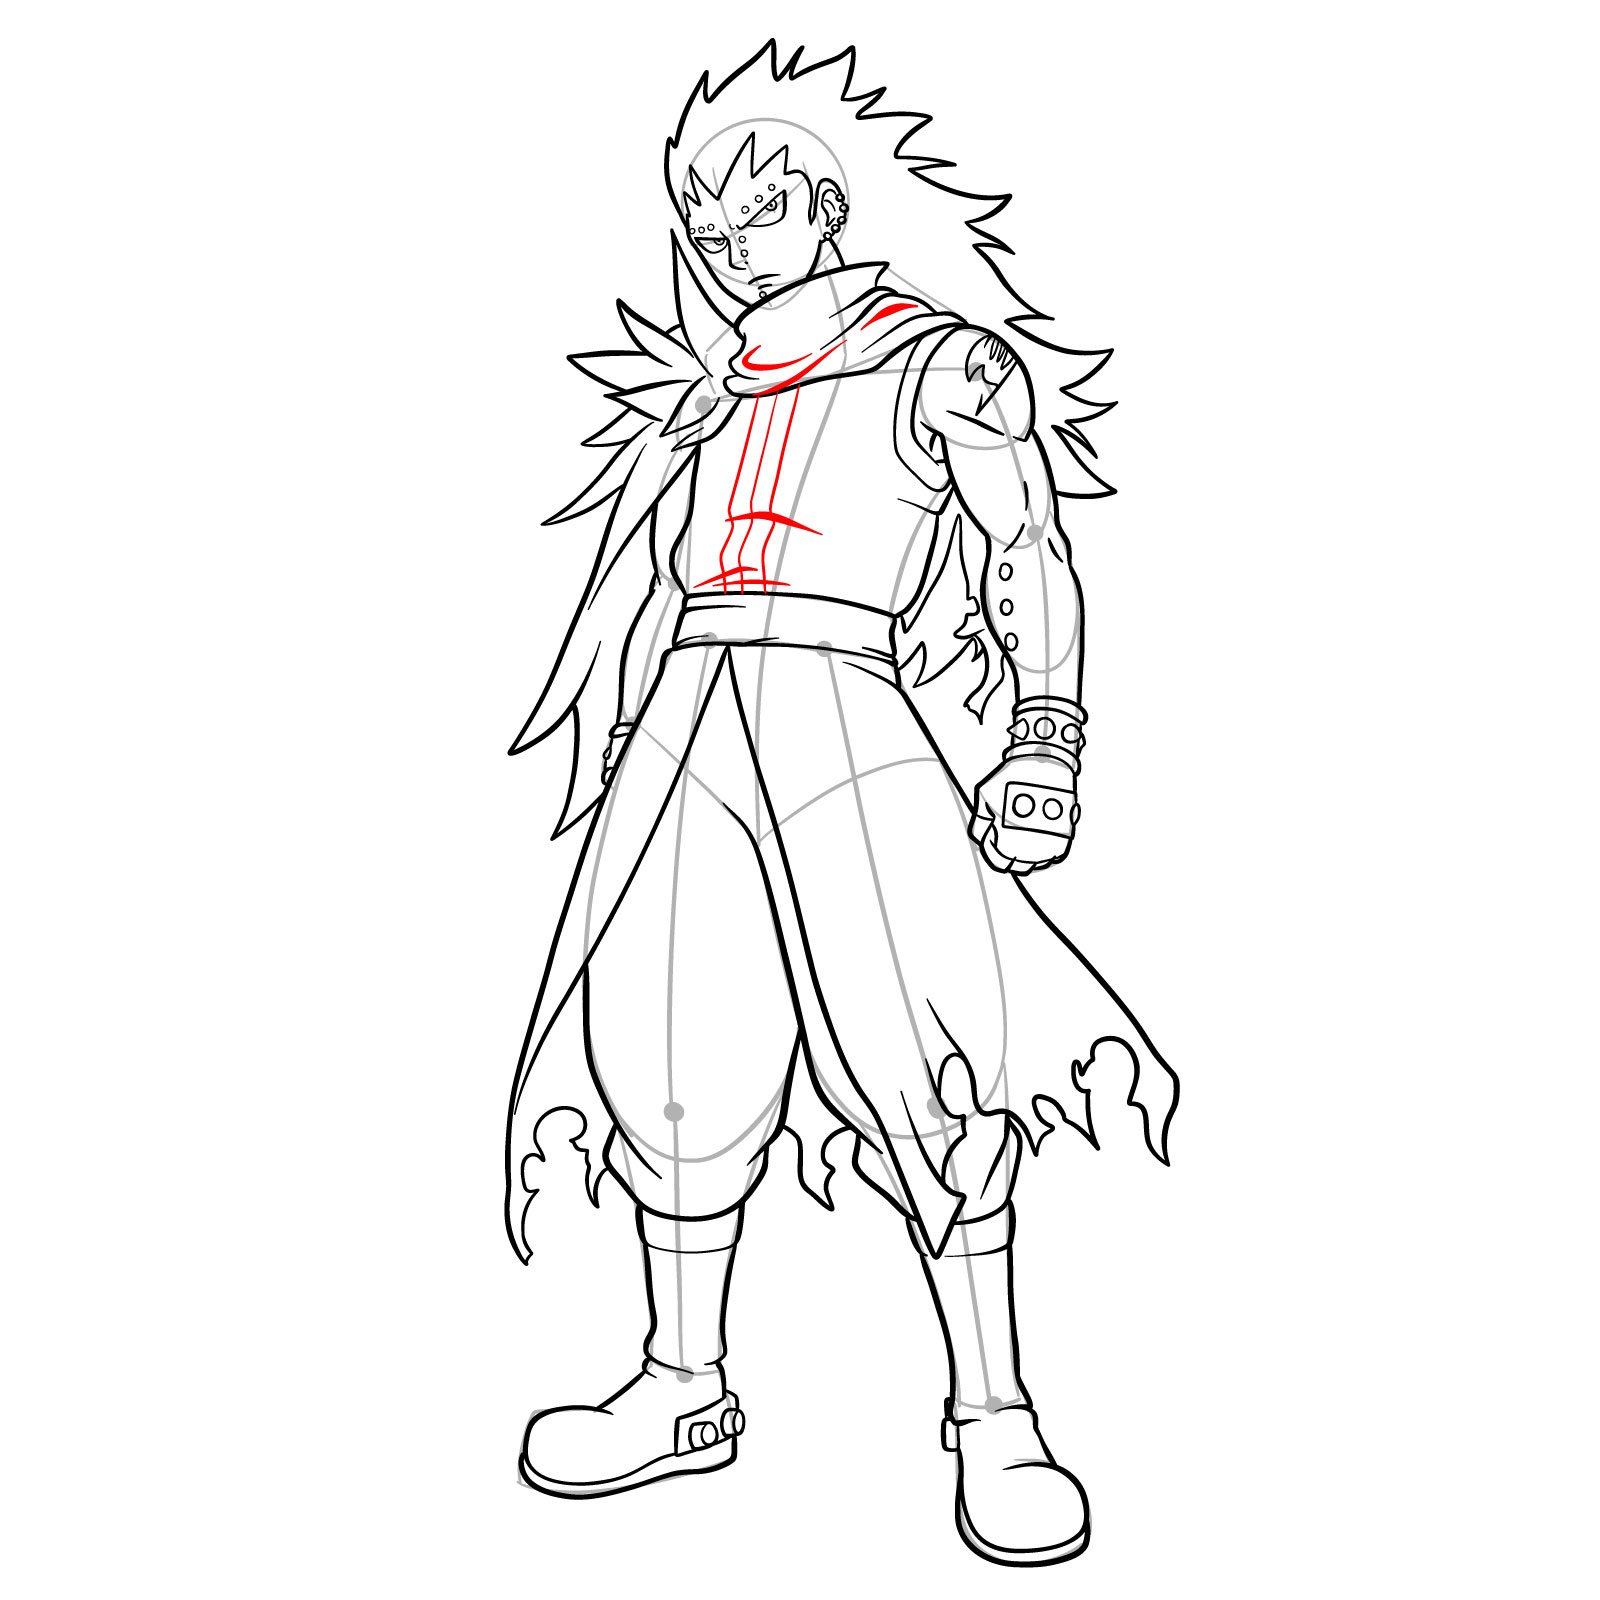 How to draw Gajeel Redfox from Fairy Tail - step 39